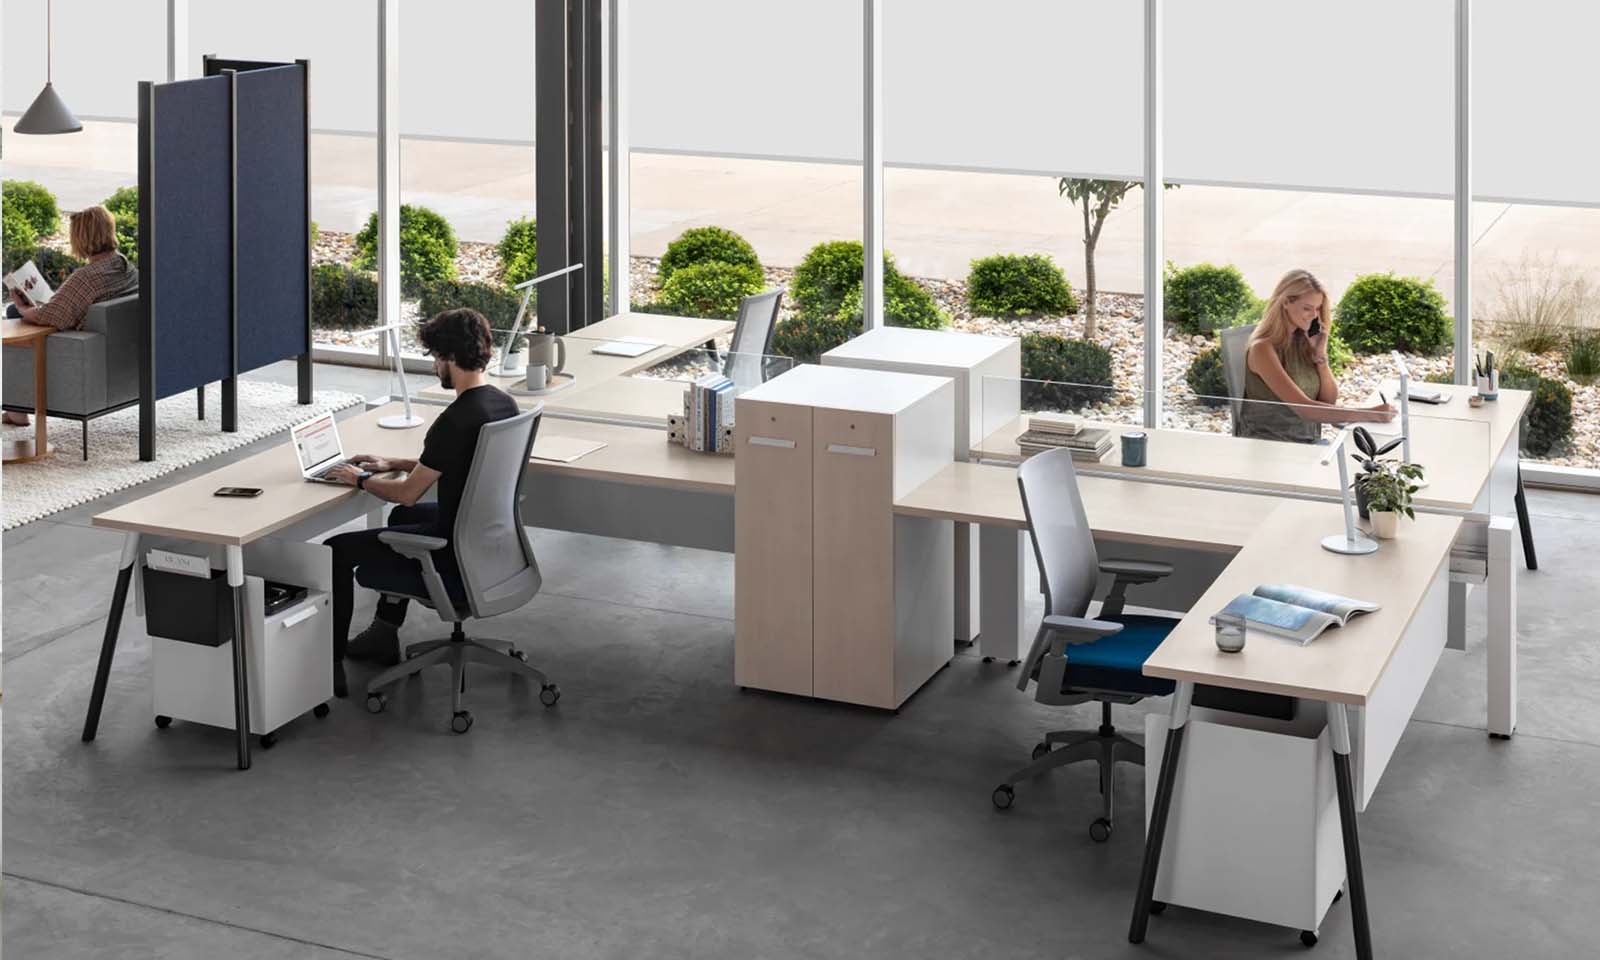 Man and woman sitting at workstations space in an office.